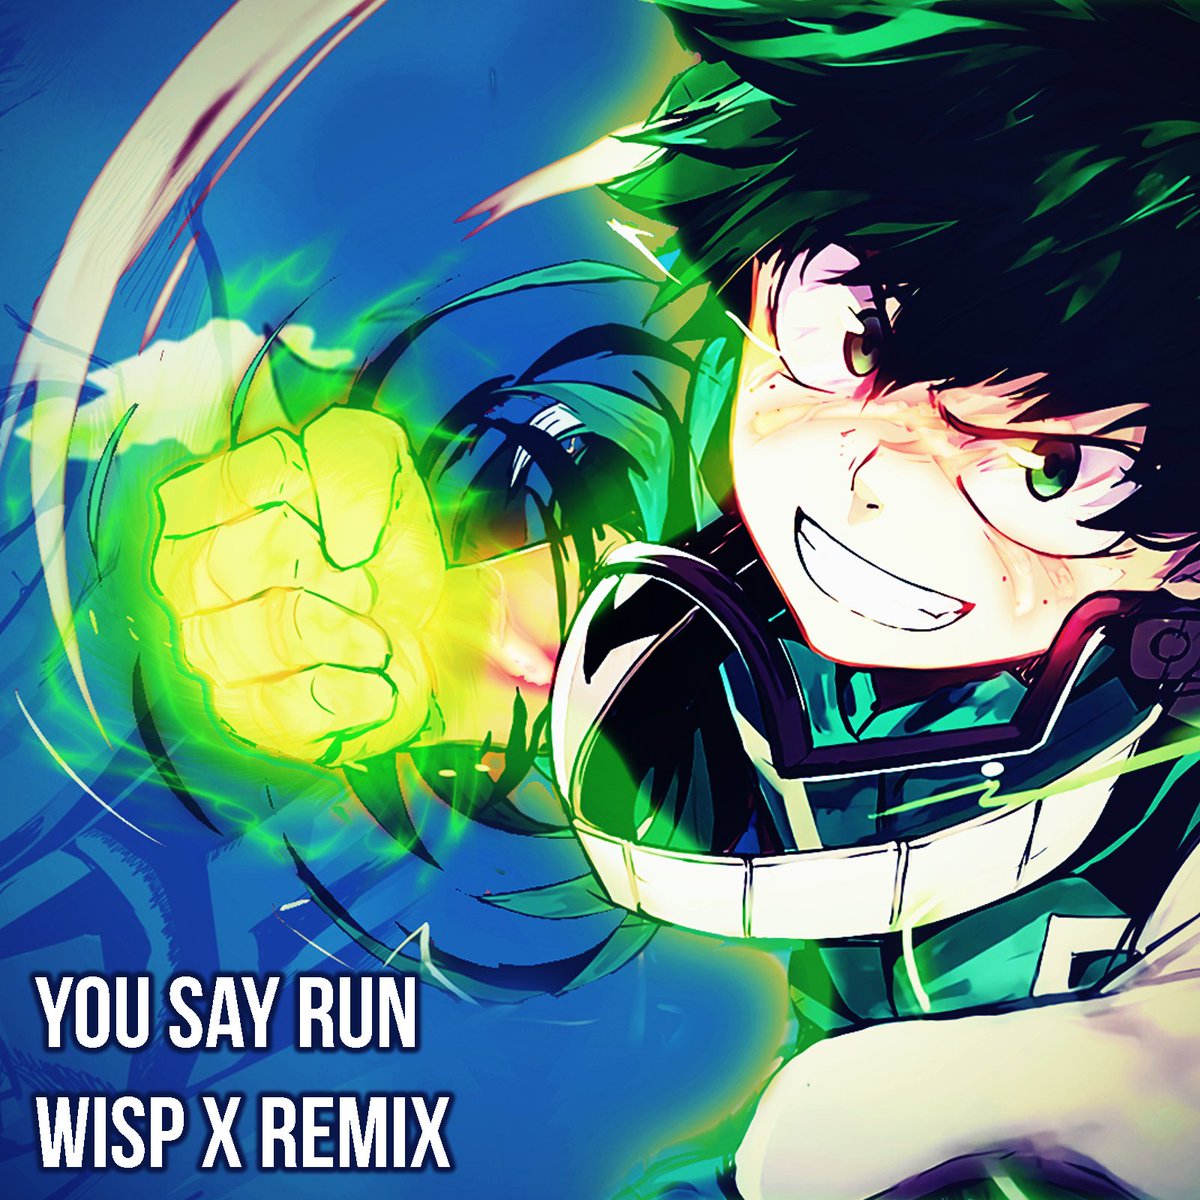 On Twitter My Hero Academia You Say Run Wisp X Remix Listen To The Remix Https T Co Umlawcaxvy Buy It Here Https T Co Mbwrfskdts I Hope You Guys Like It Plus Ultra Https T Co Wkgltclzd1 - you say run roblox music id code youtube